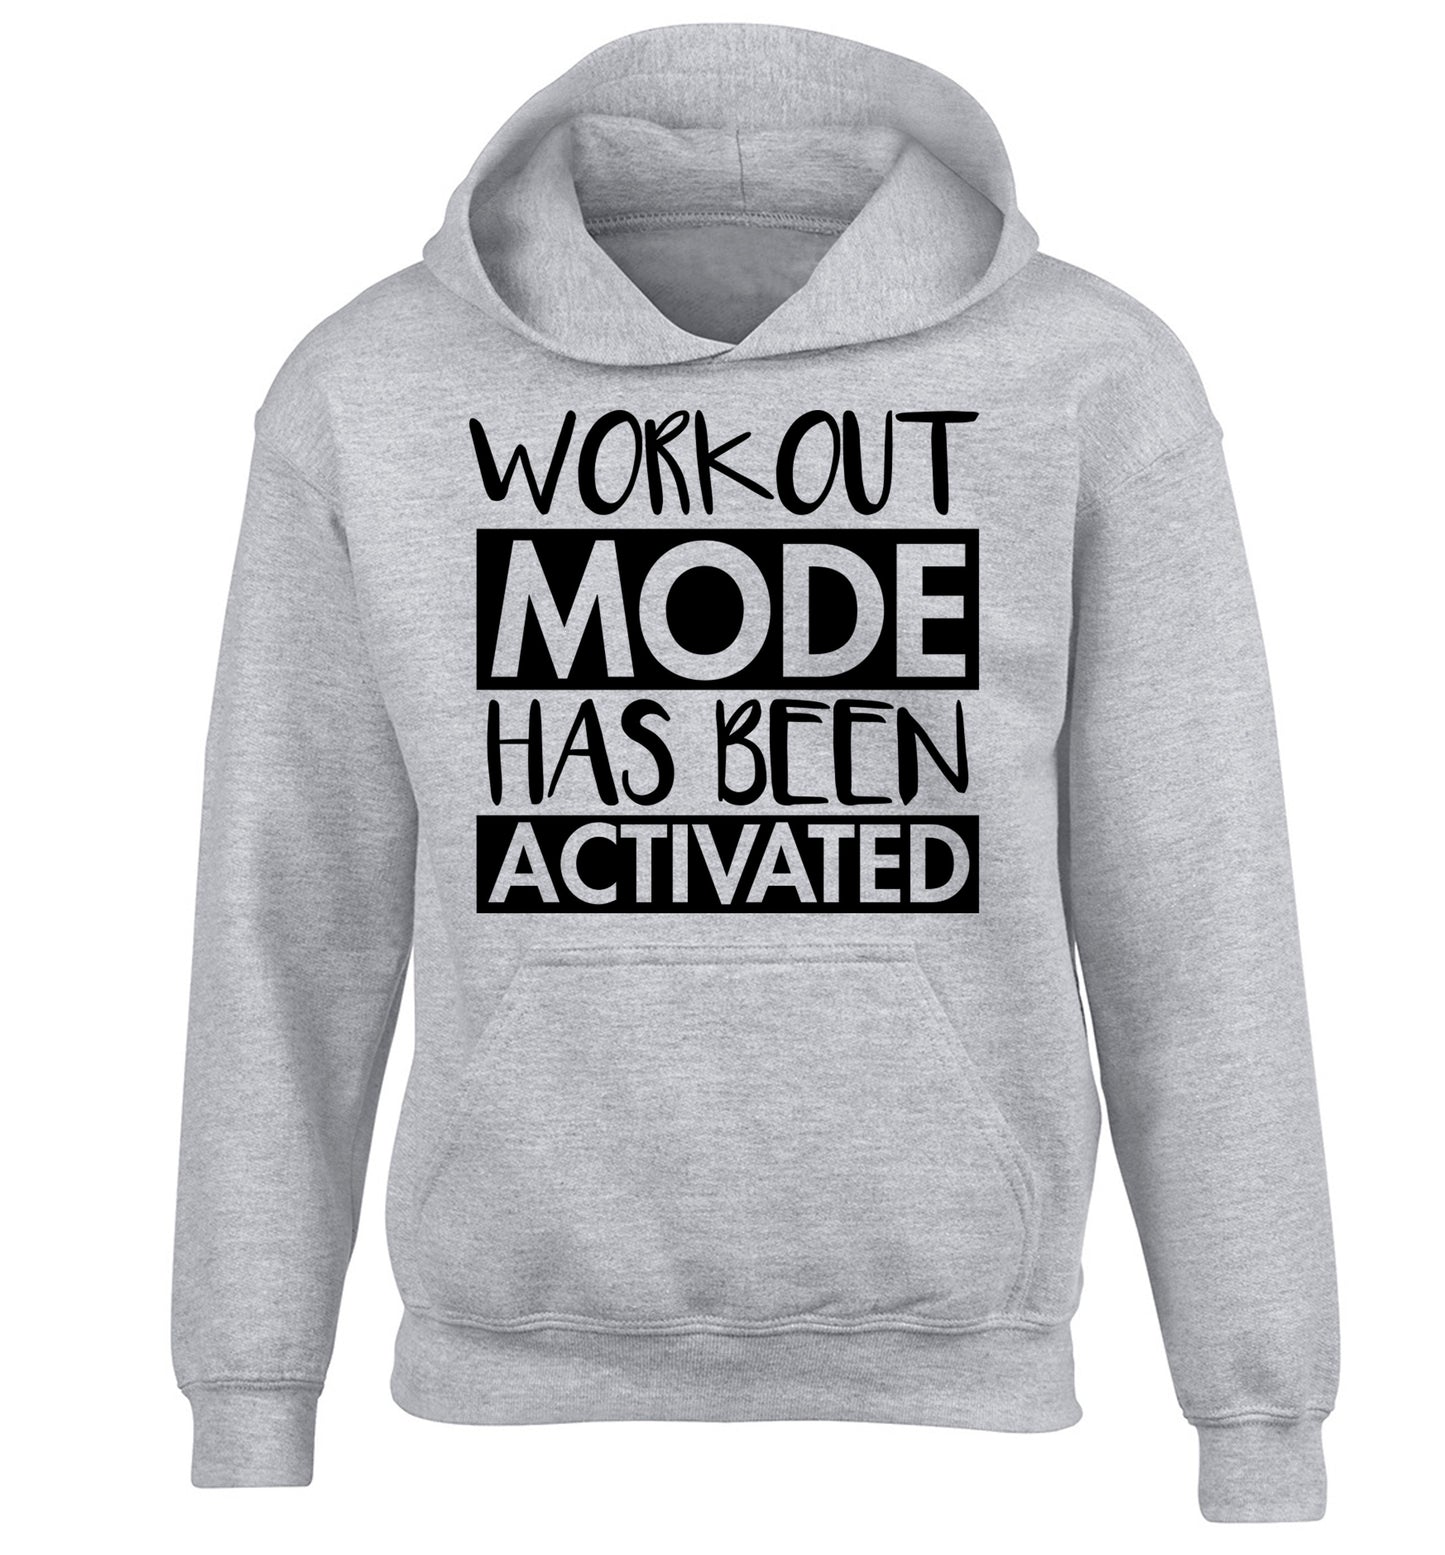 Workout mode has been activated children's grey hoodie 12-14 Years